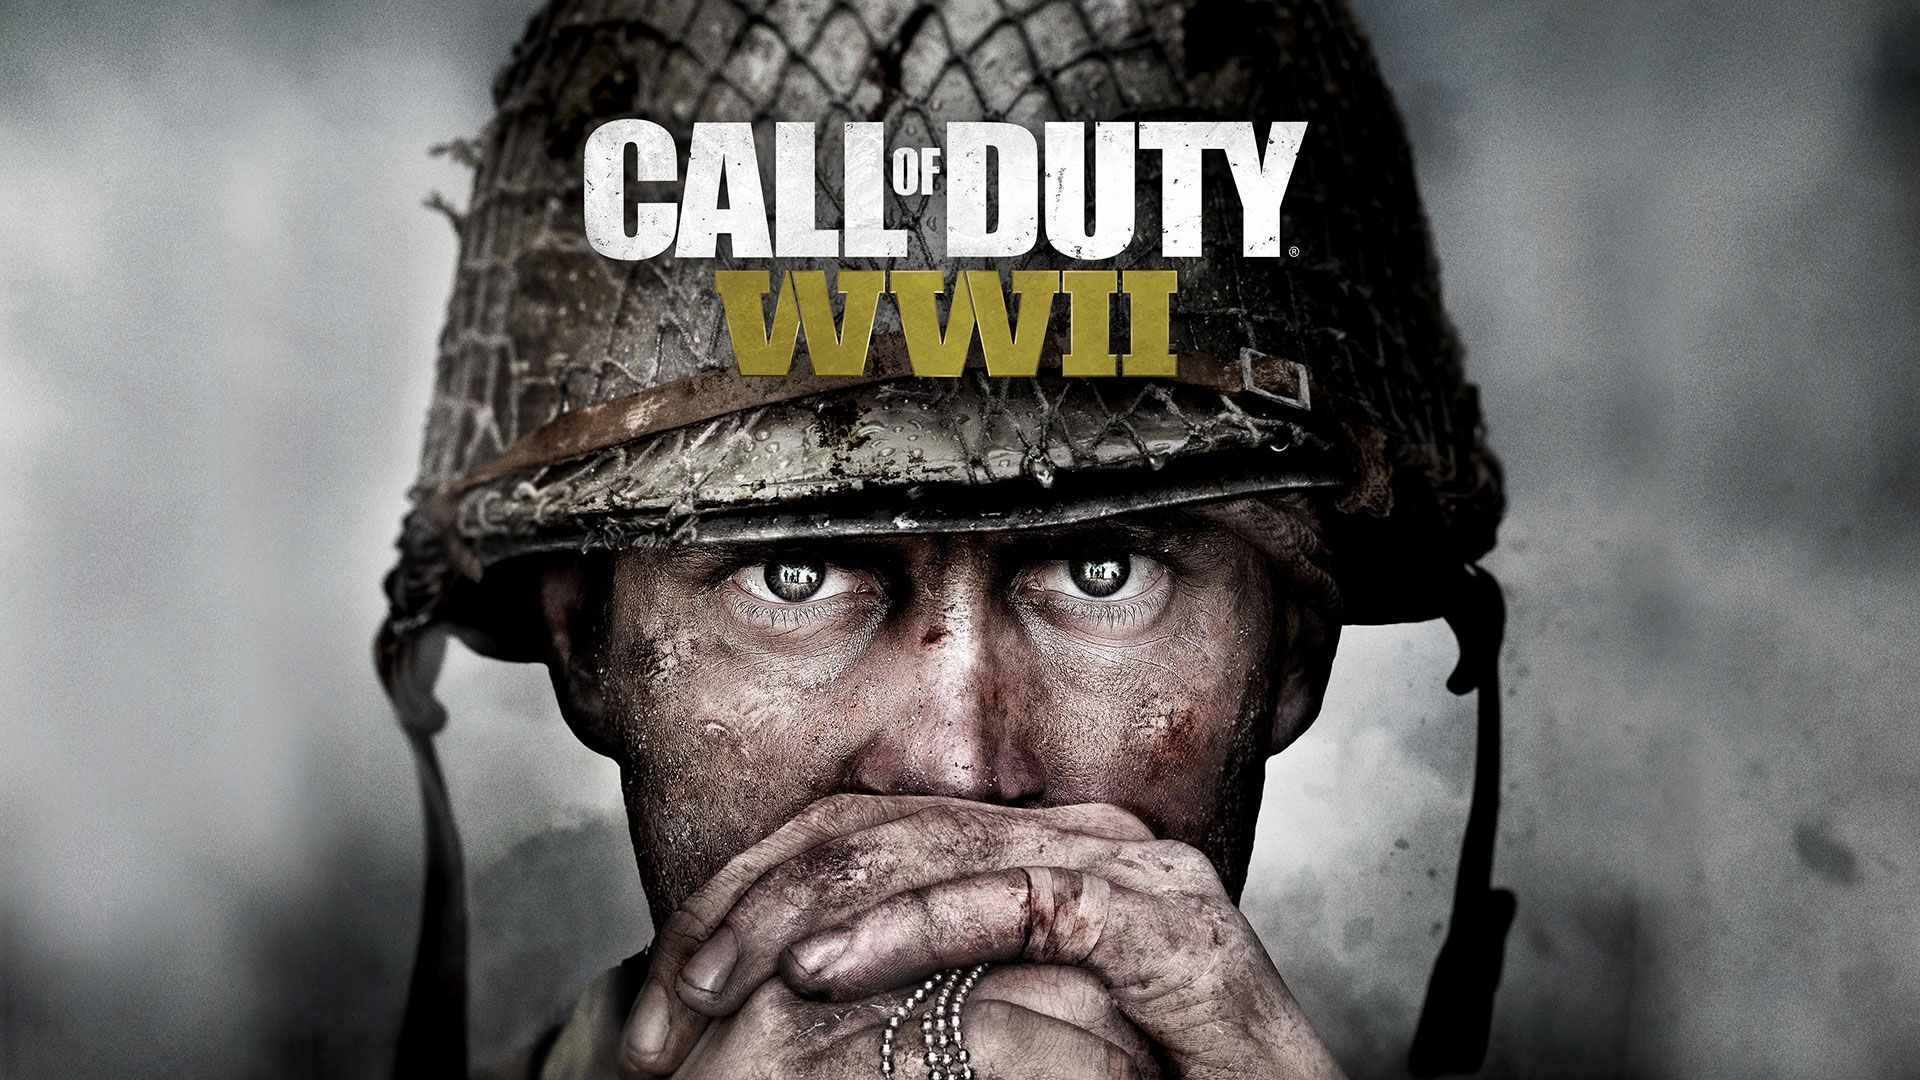 call of duty, video game, call of duty: wwii